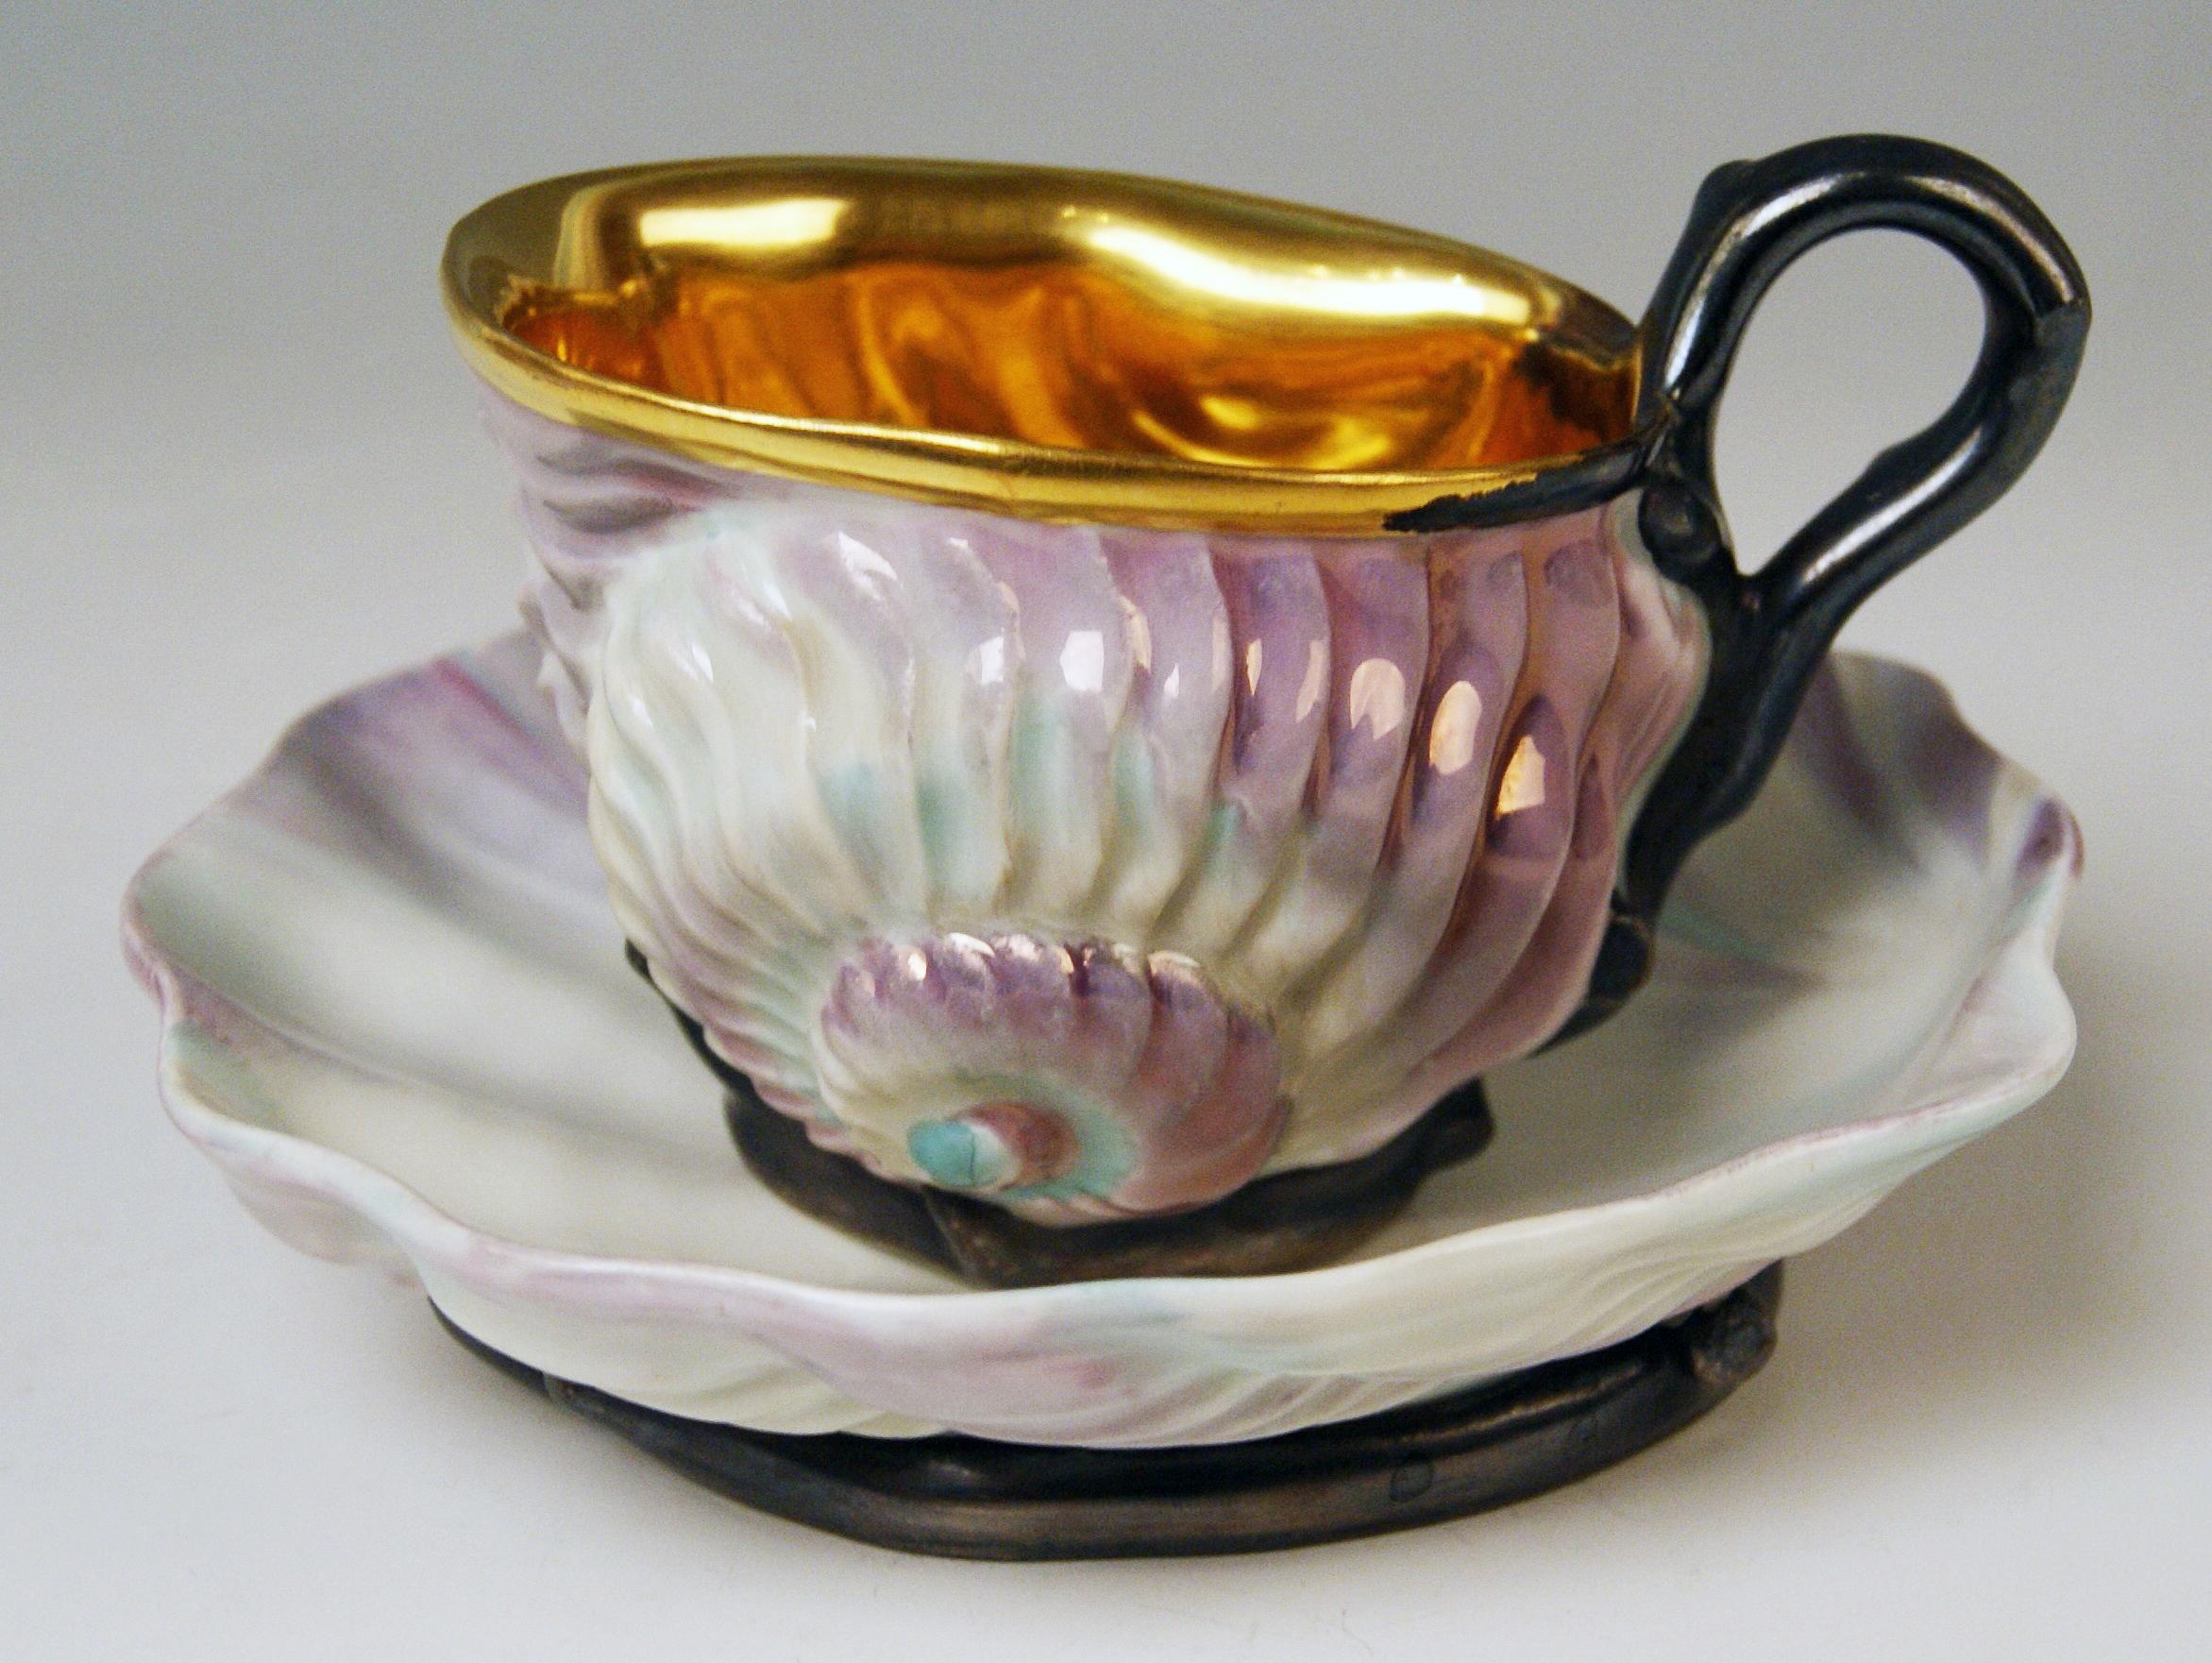 Cup as well as saucer or rare form type:
Handled Cup Shaped As Snail / Saucer Having Appearance Of A Round Clam

Vienna / Old Imperial Austrian Porcelain Manufactory 
(= Alt Wien / Kaiserliche Porzellan Manufaktur)
dated 1826

Hallmarked:
--